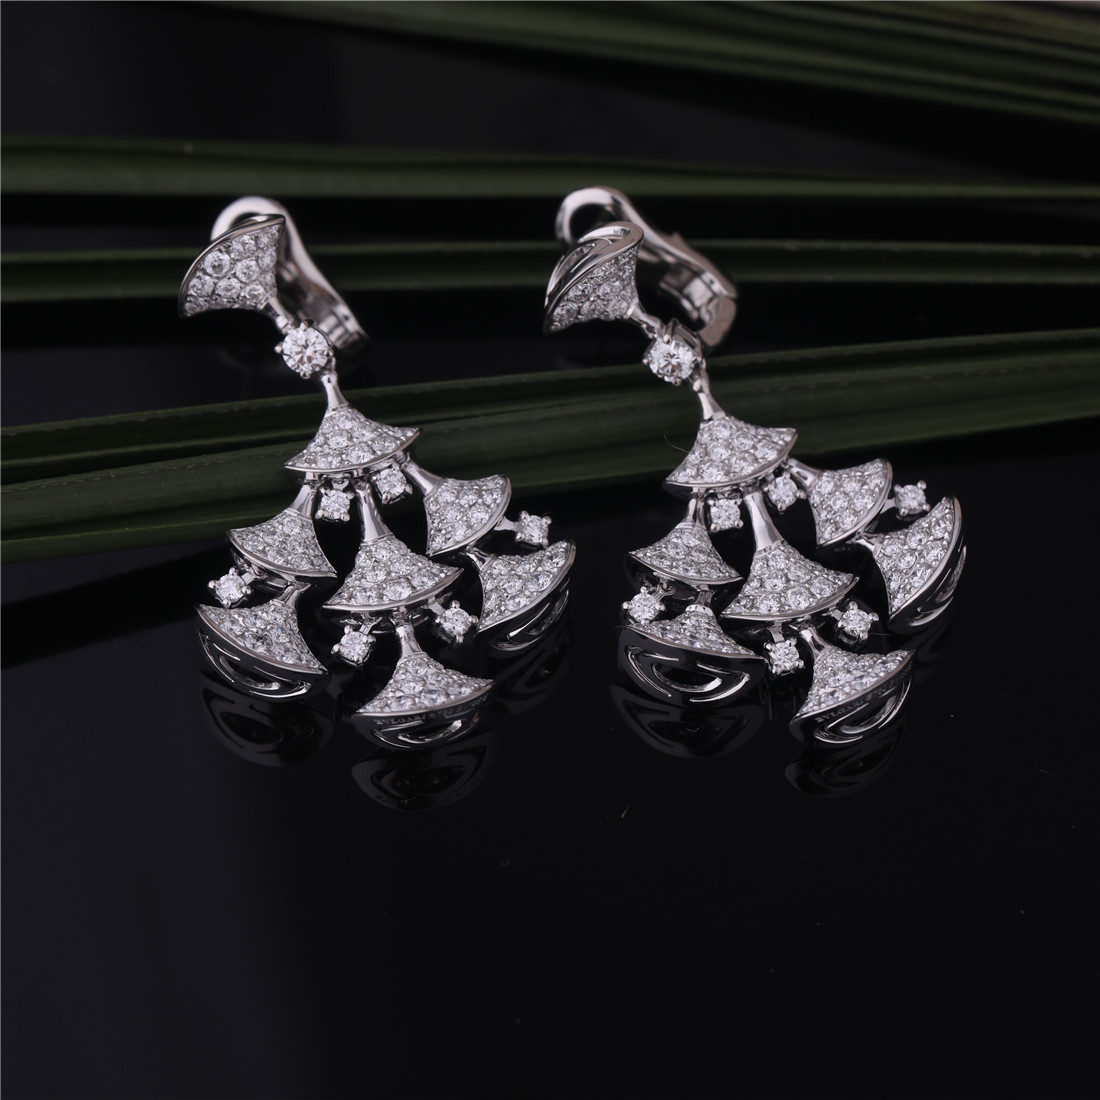 Quality Roma High Jewelry DIVAS' DREAM Earrings in 18K white gold set with 7 Main Diamonds and full pavé diamonds for sale